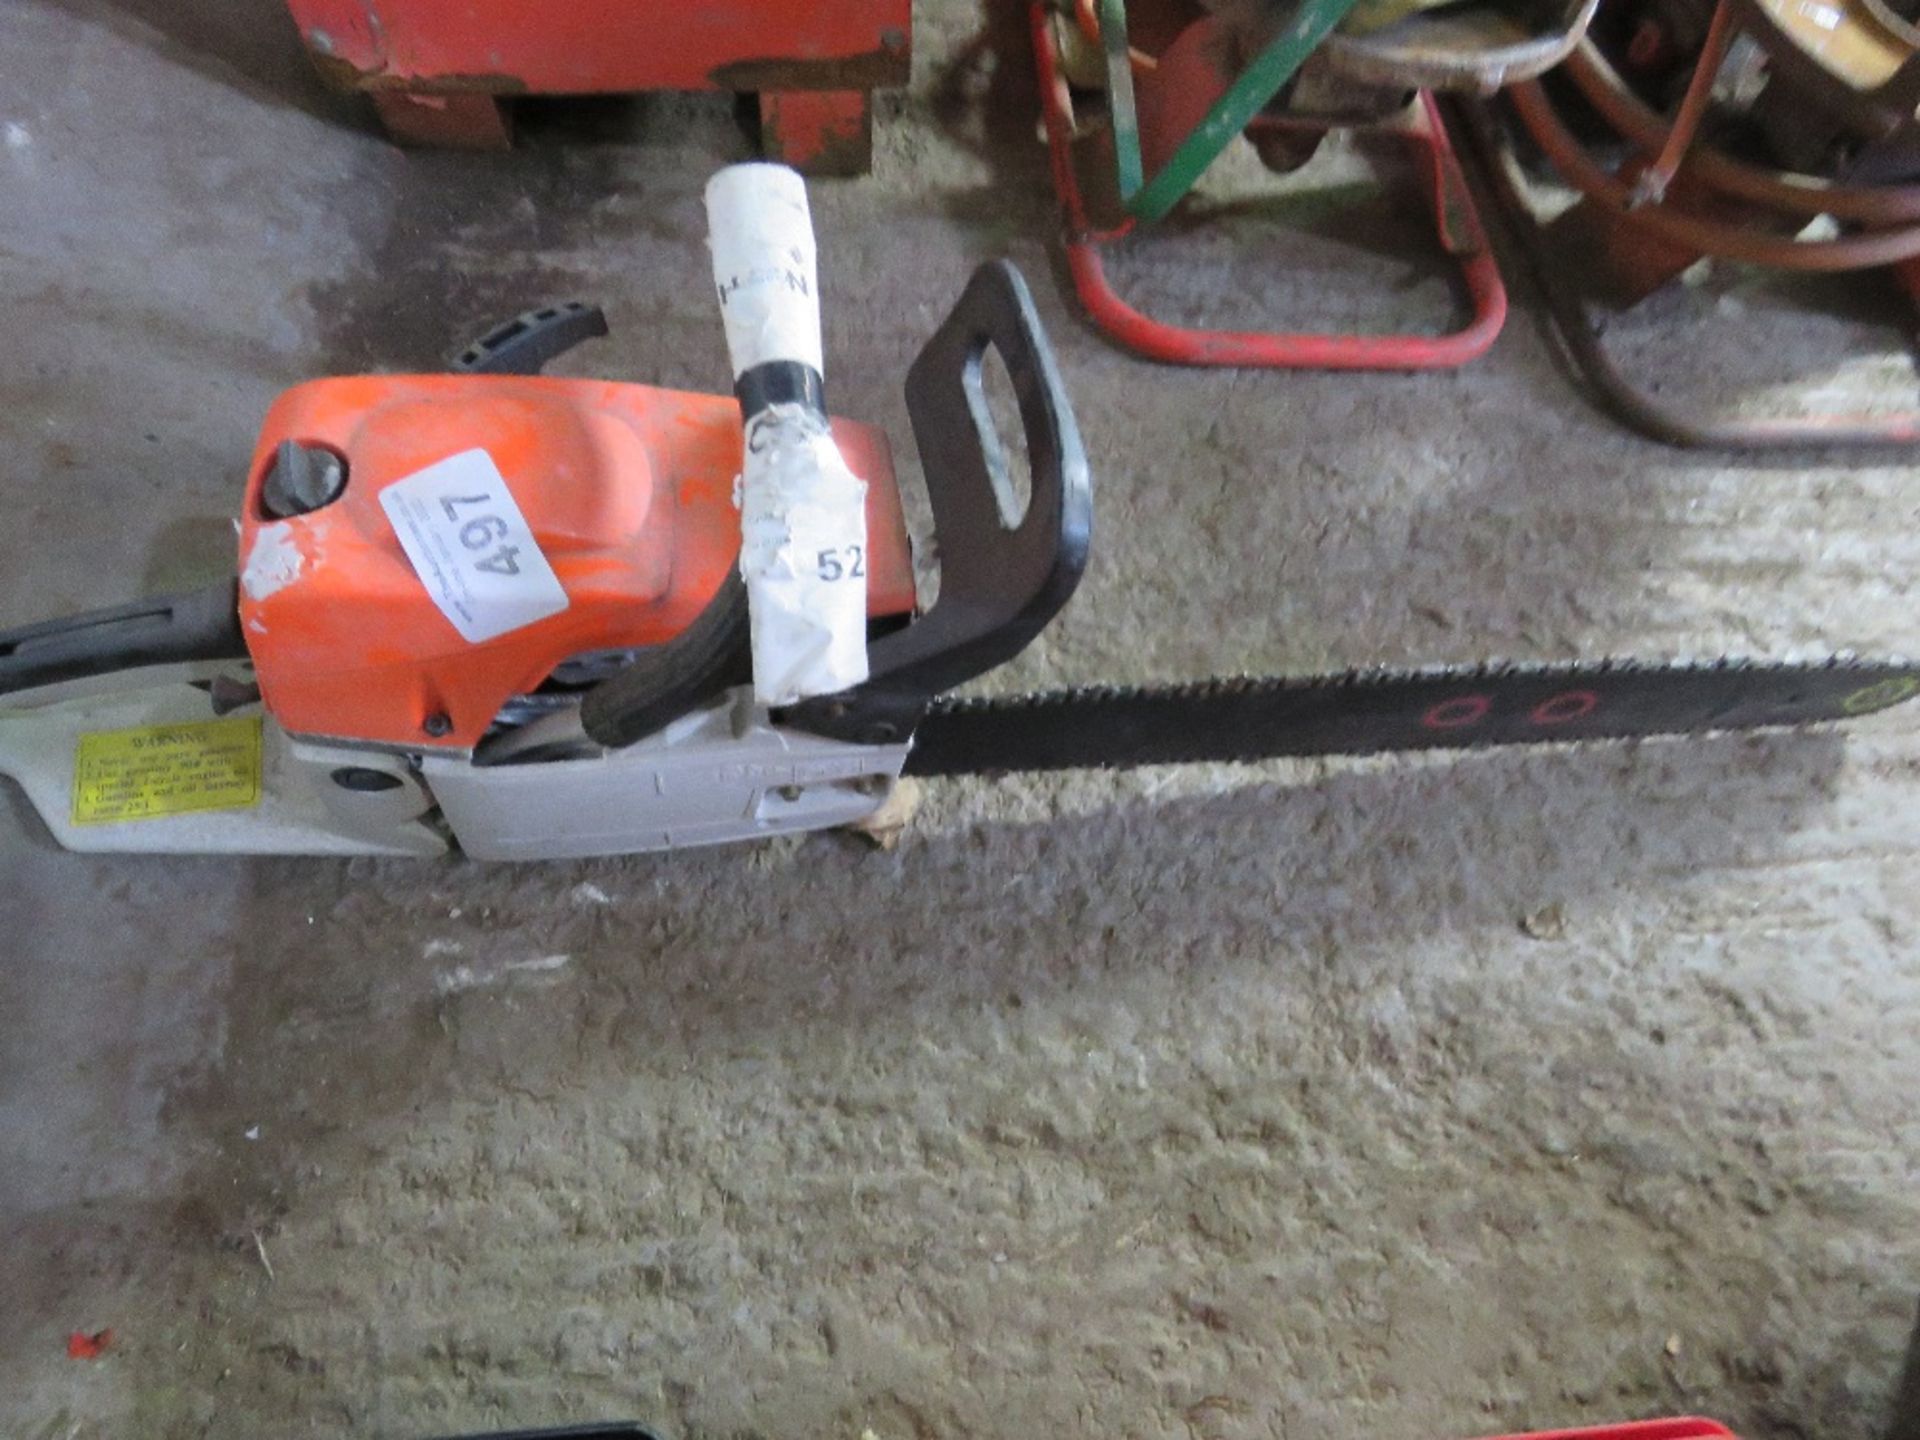 PETROL ENGINED CHAINSAW WITH INSTRUCTIONS.